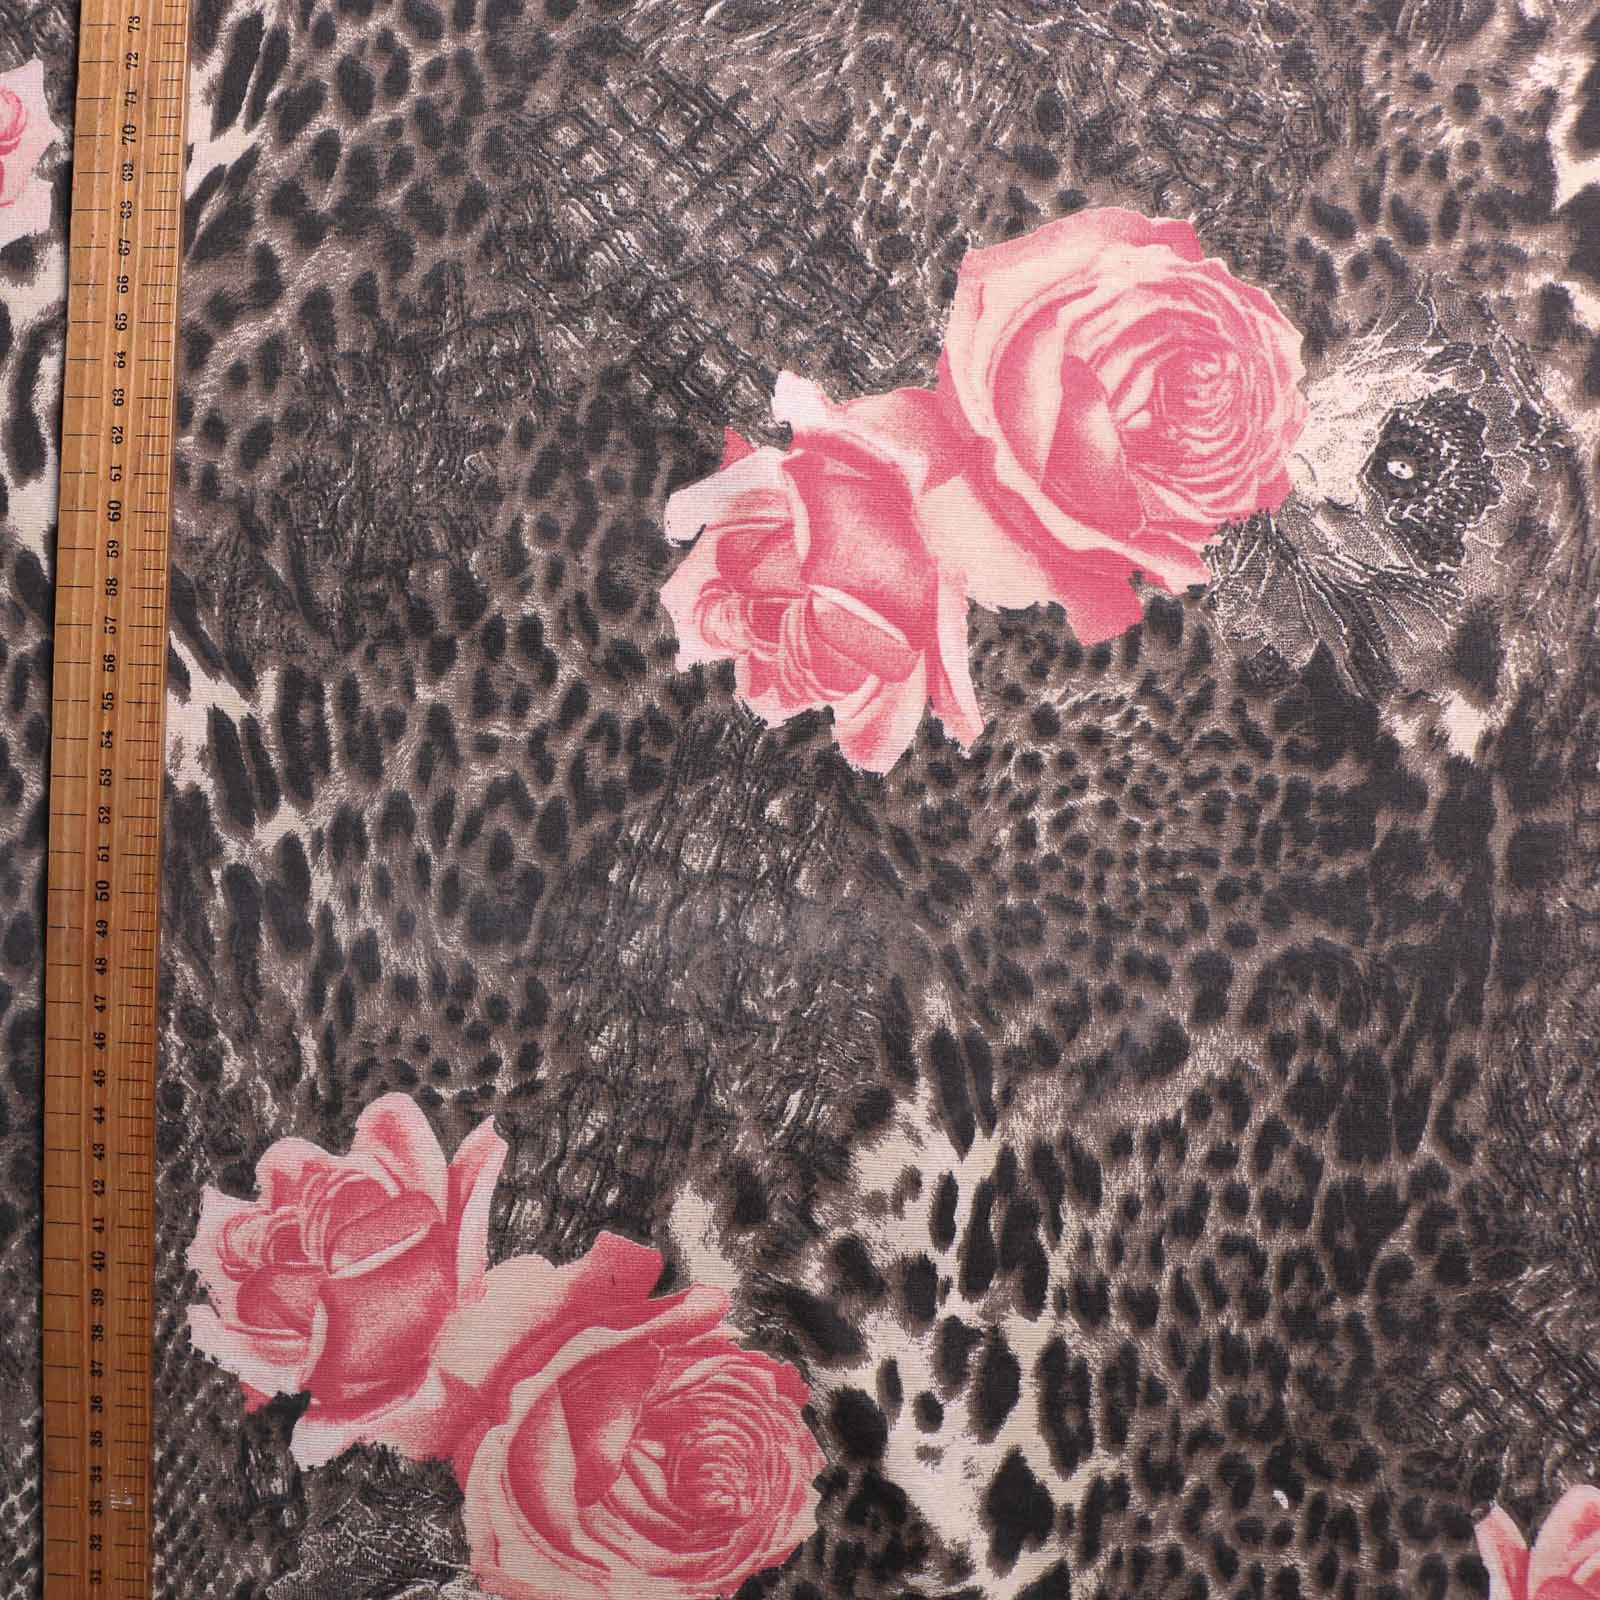 metre pink and brown ponte roma jersey knit dressmaking fabric with punky leopard animal print